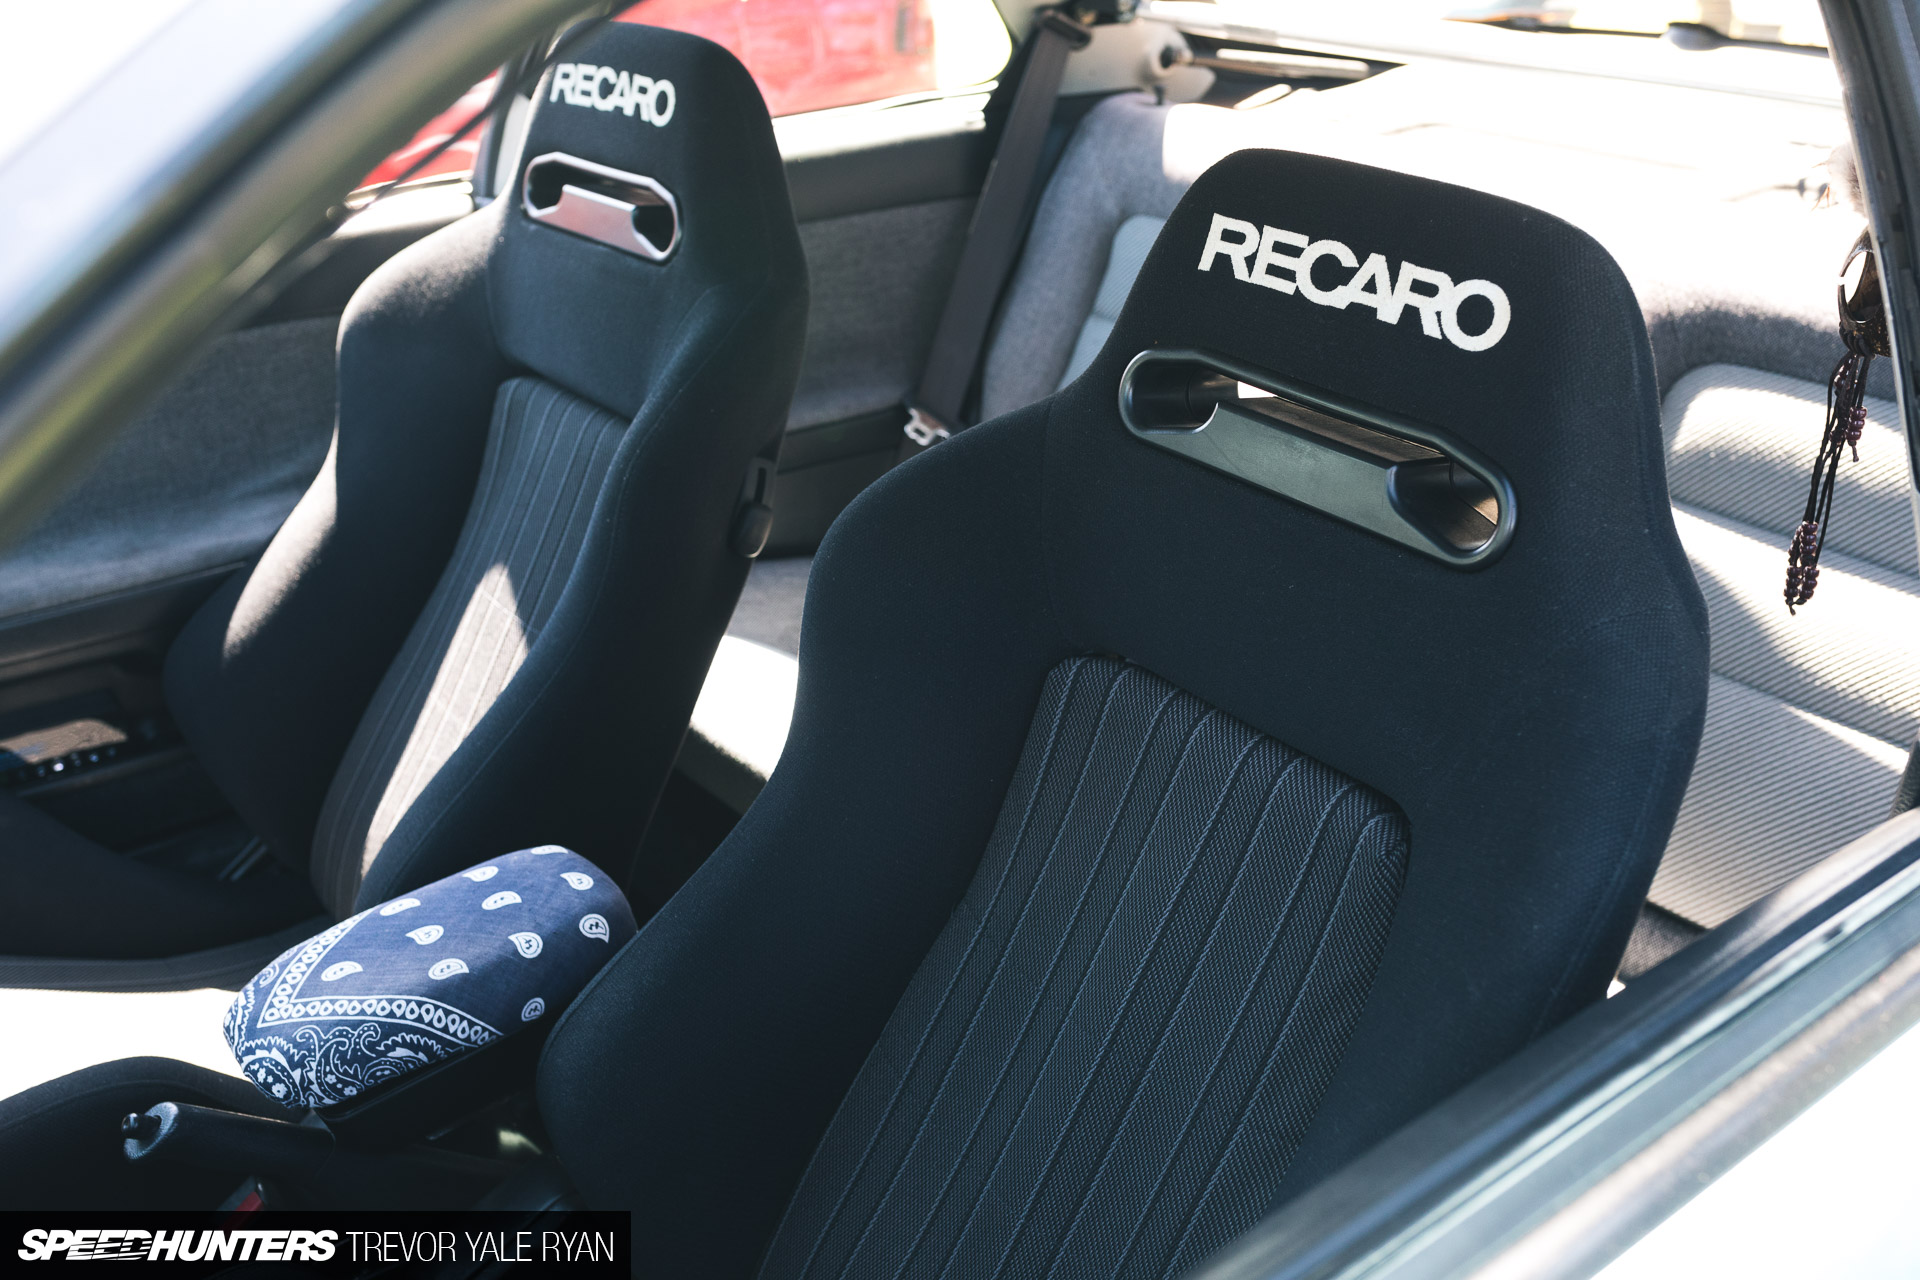 '90s Dreaming With Honda At JCCS - Speedhunters